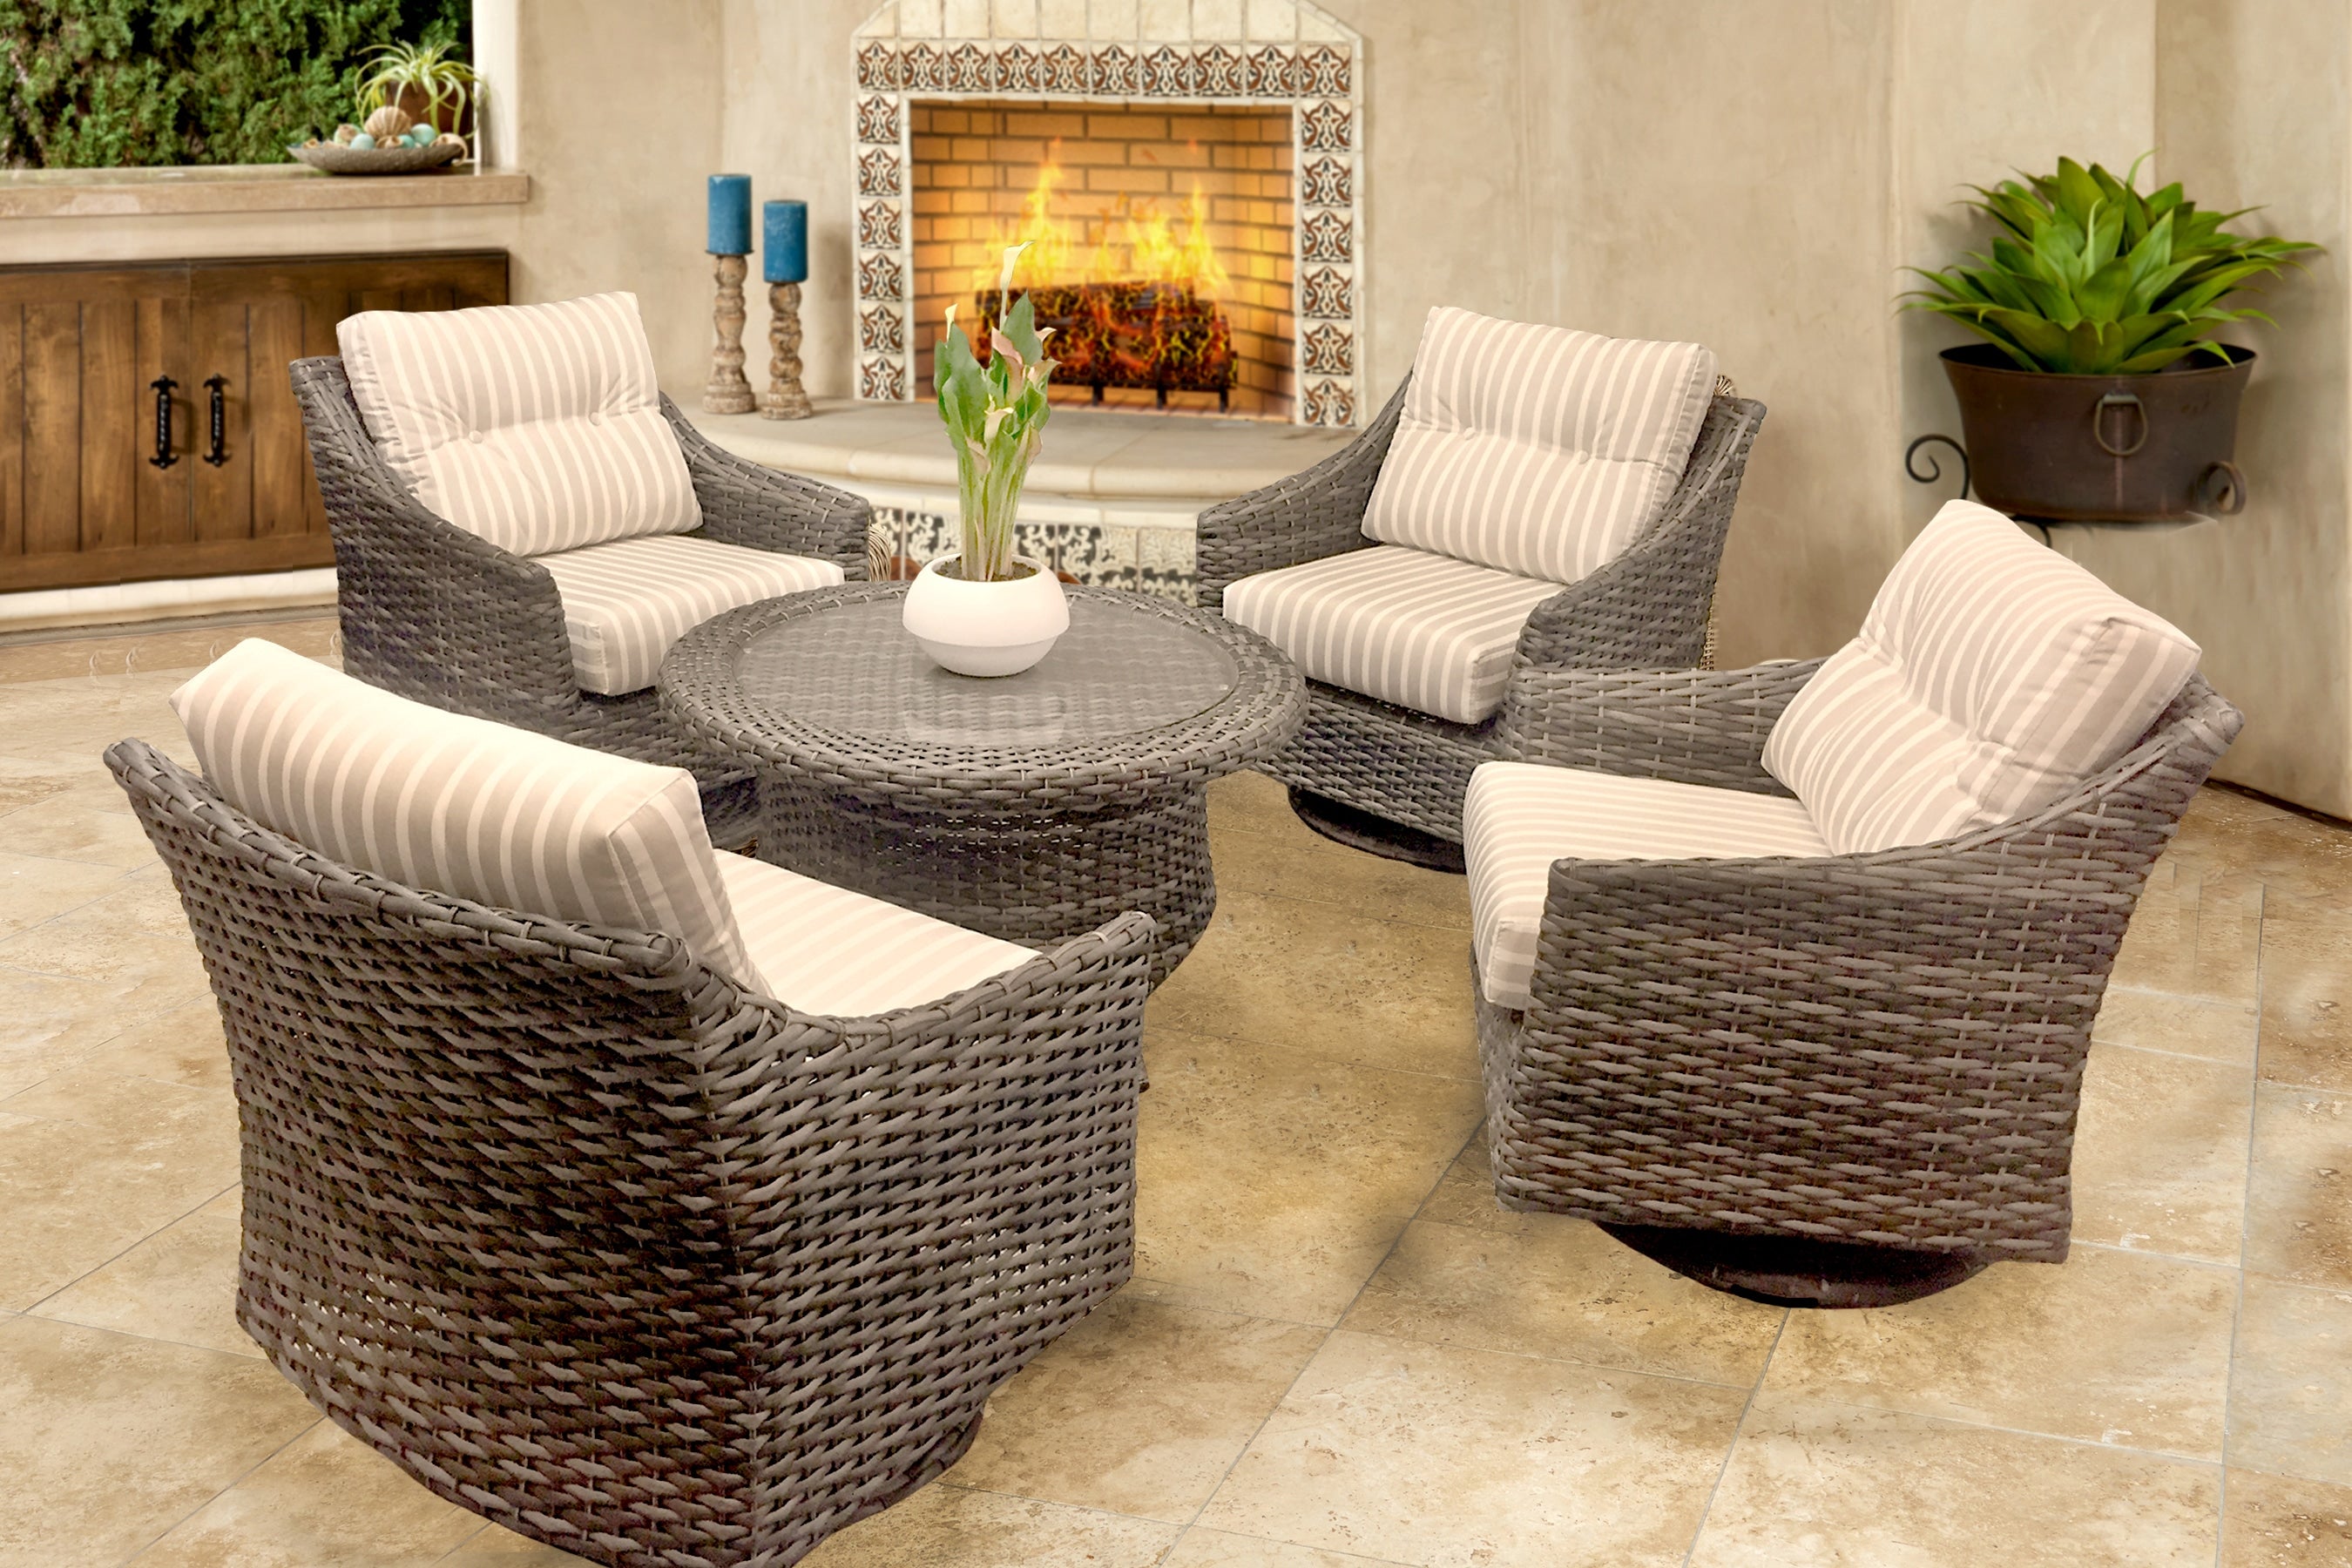 5 Trends to Watch in Outdoor Furniture and Decor